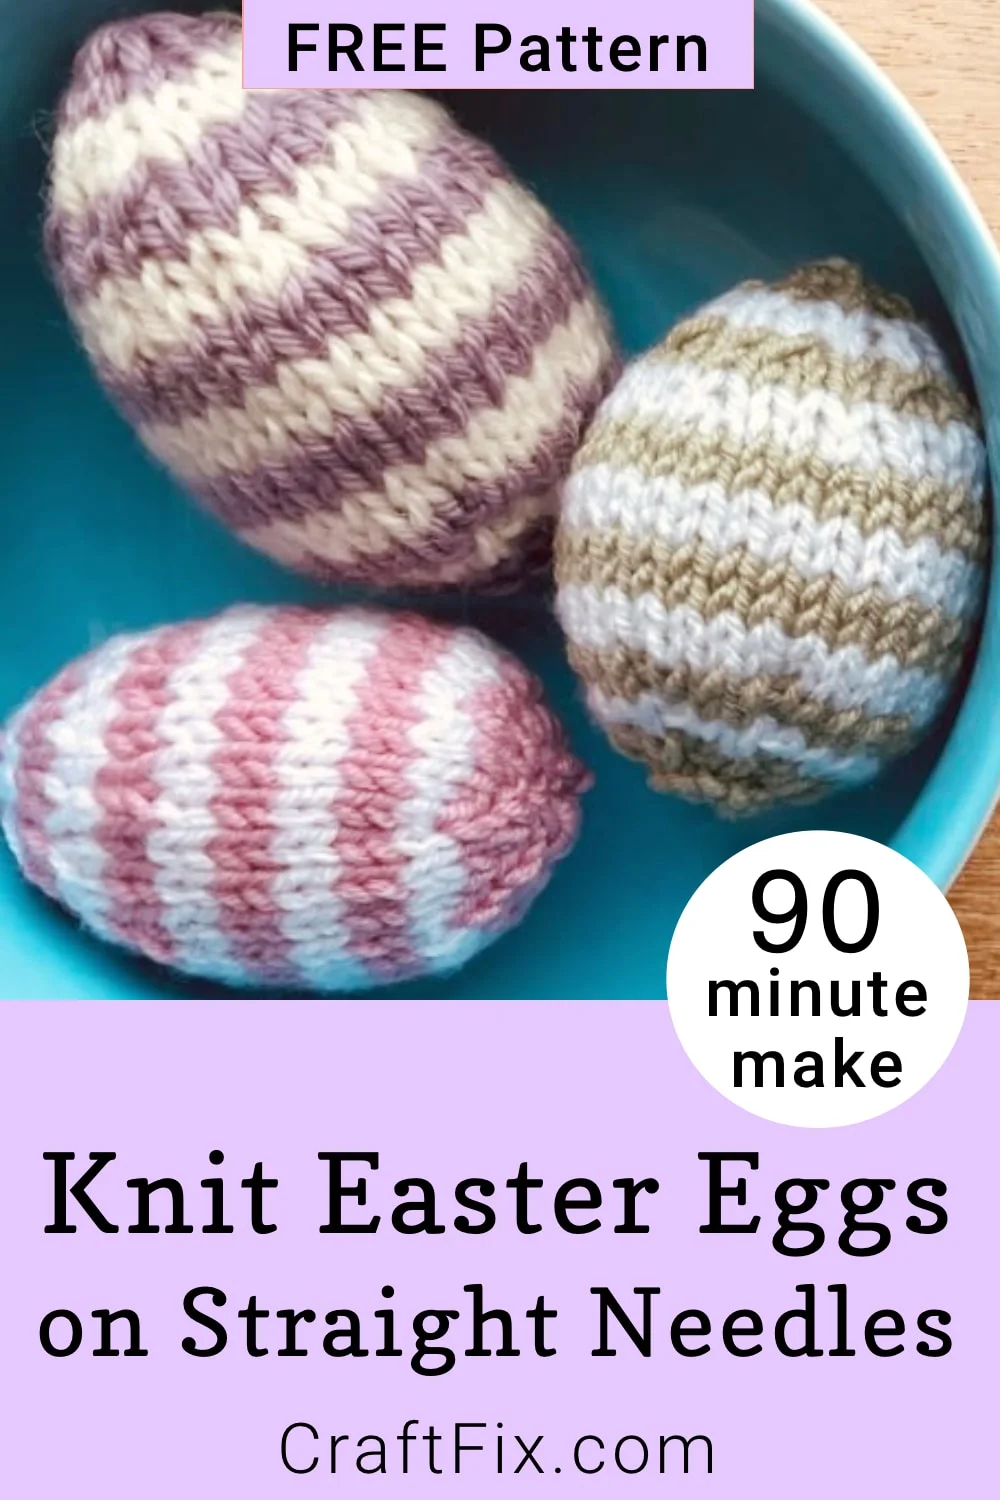 Close up of striped easter egg decorations knit with straight needles in bowl, made in 90 minutes with this free pattern